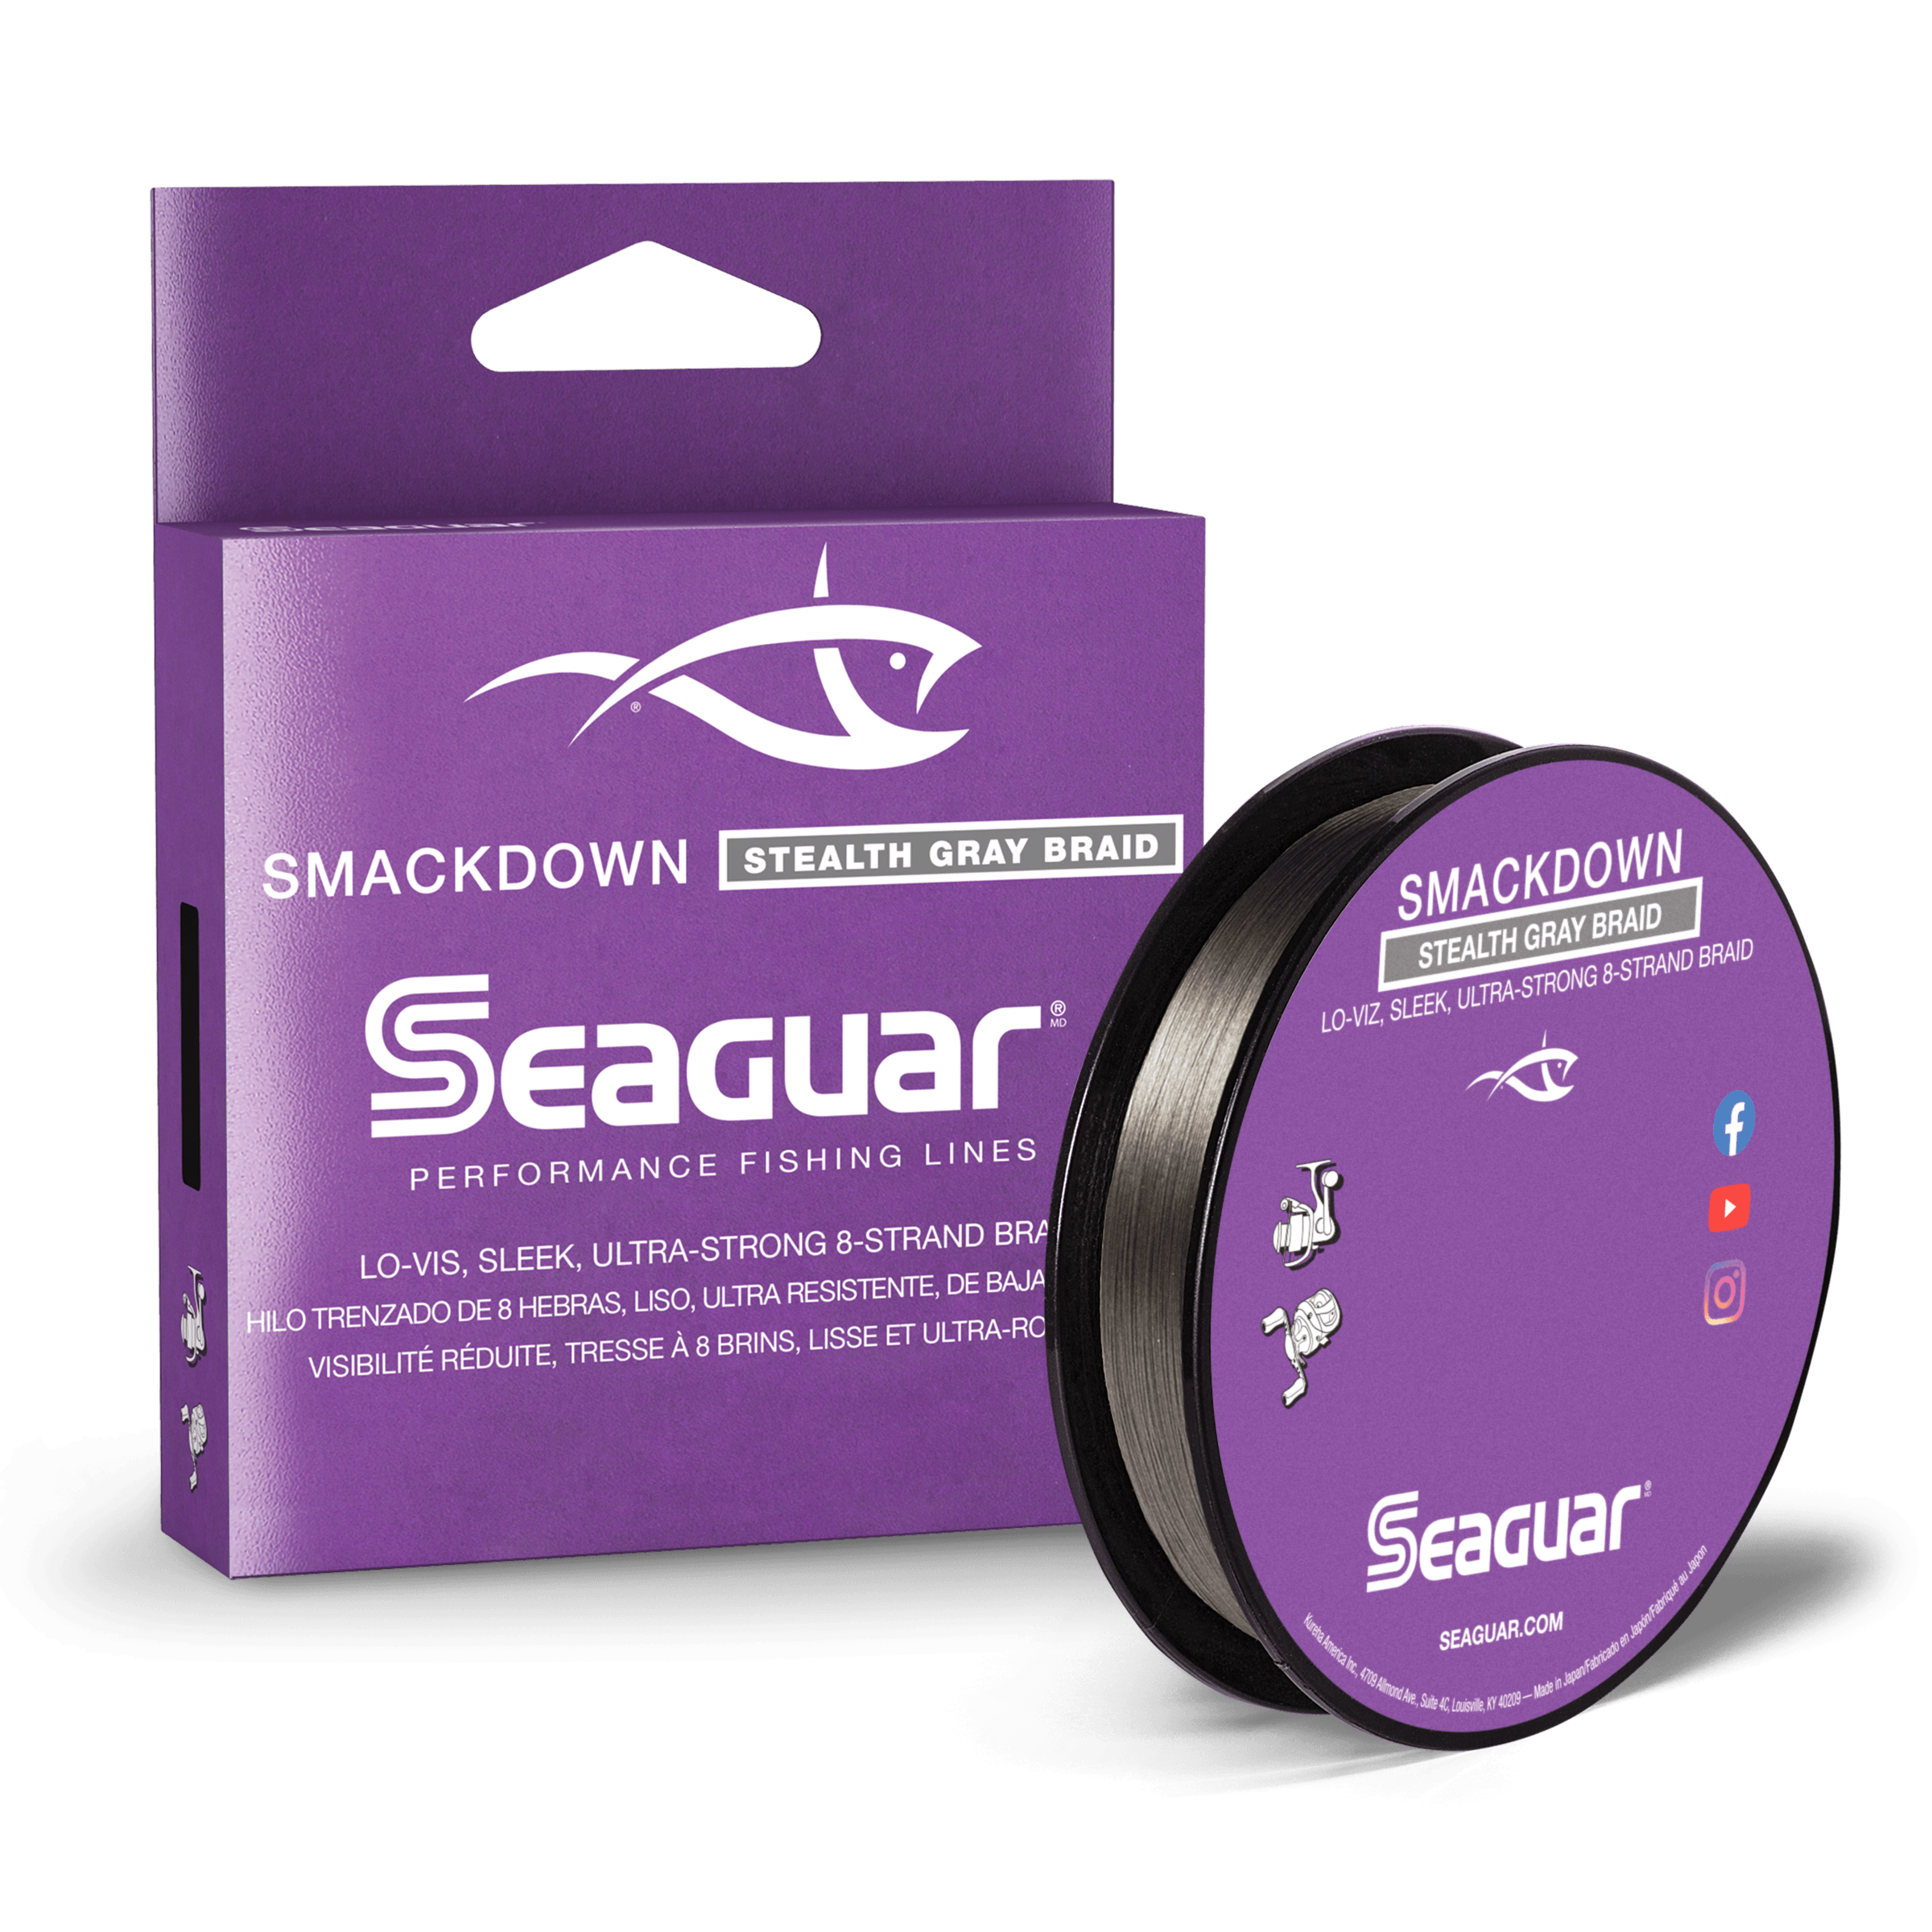 Seaguar Gold Label Fluorocarbon Fishing Line, Thin and Strong